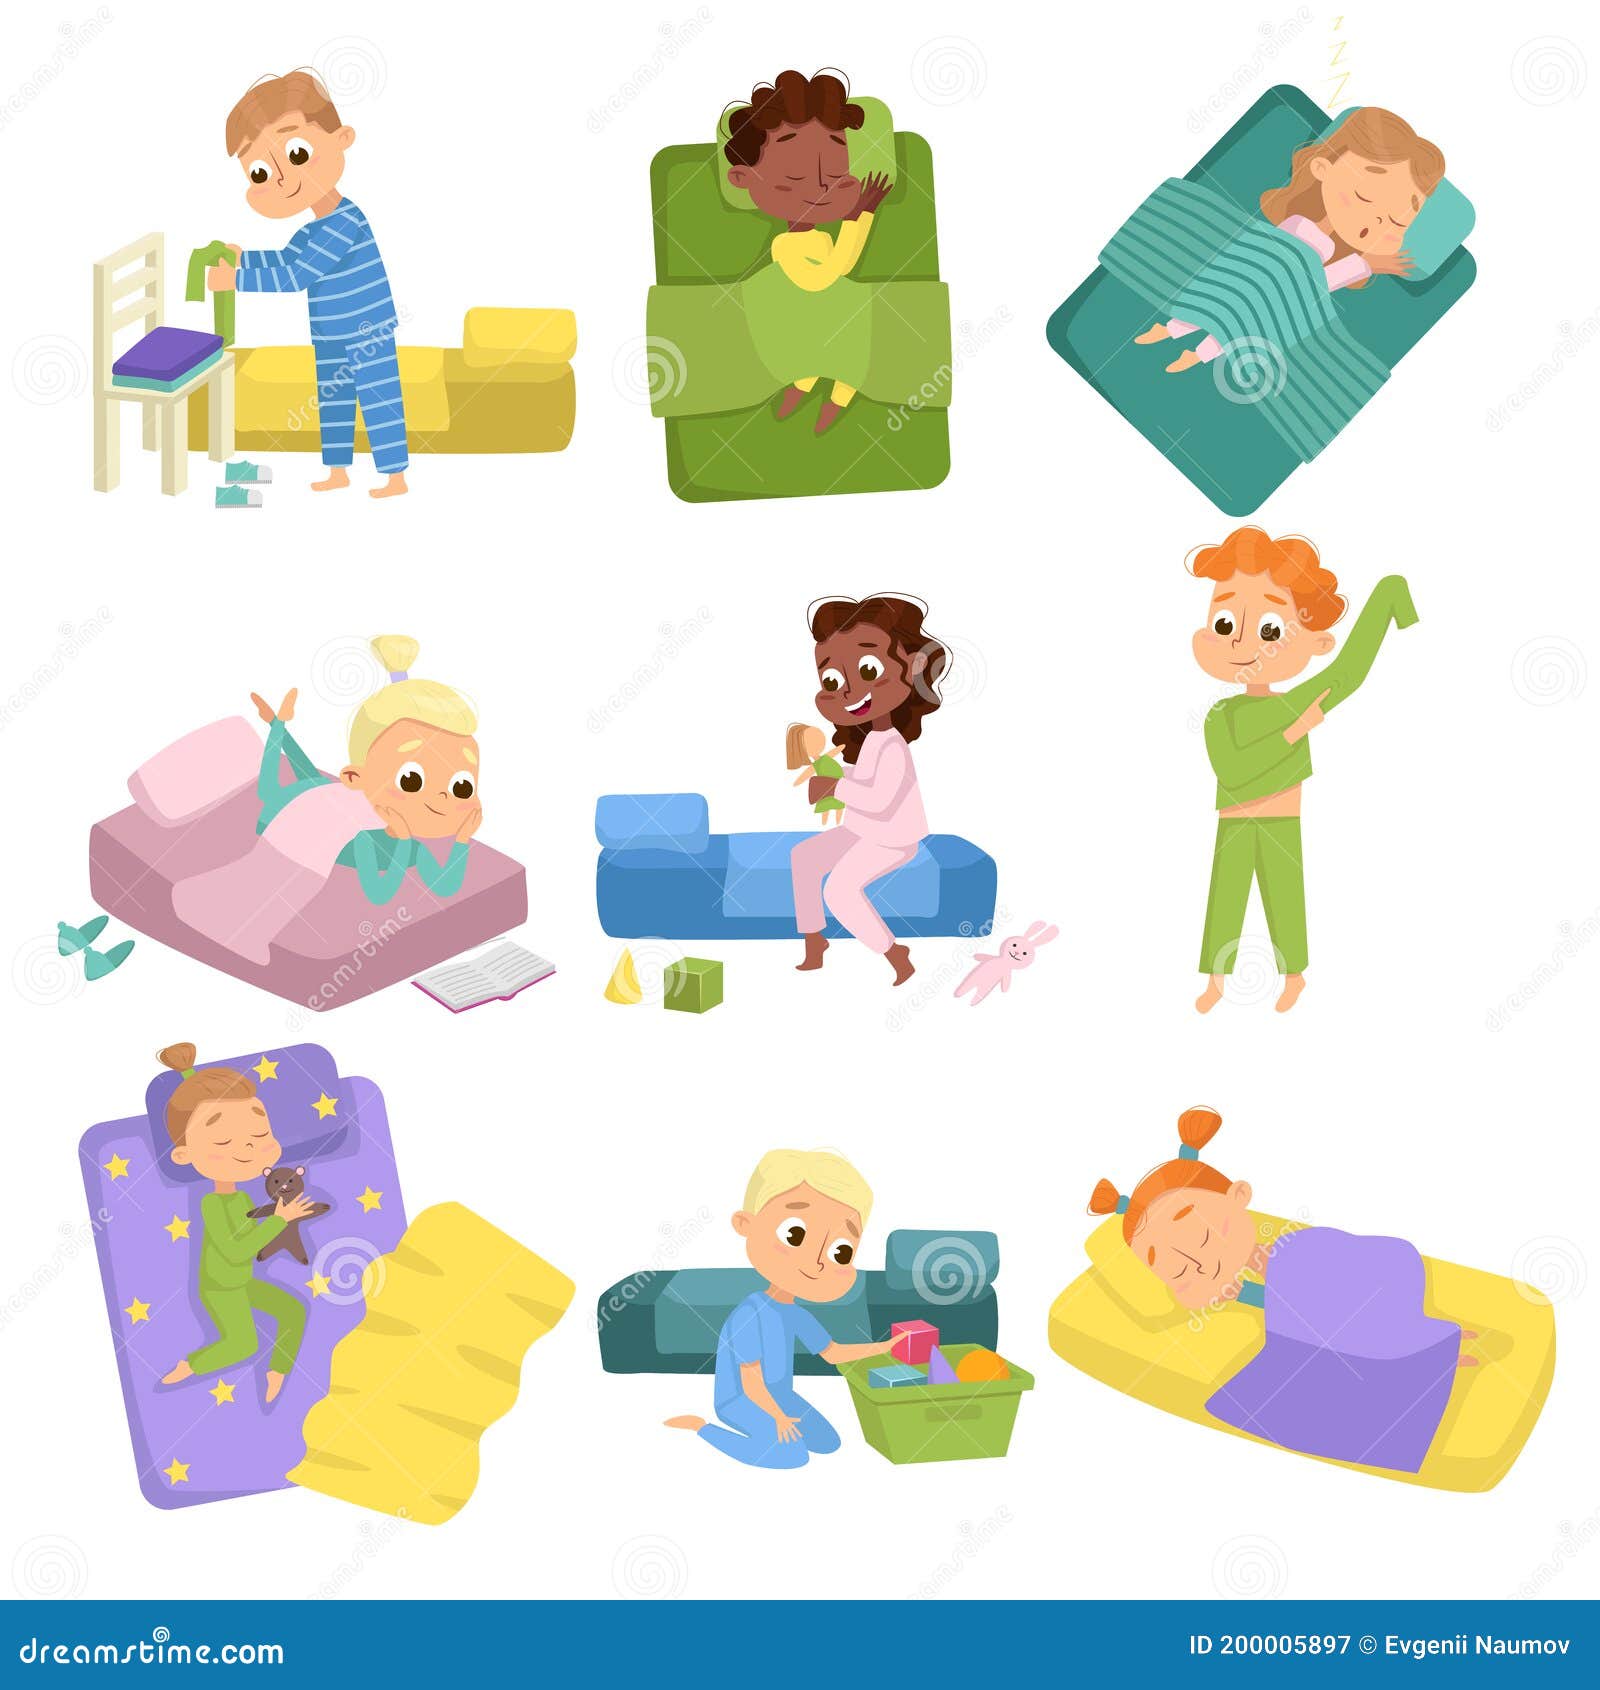 Getting Ready Bed Stock Illustrations 36 Getting Ready Bed Stock Illustrations Vectors Clipart Dreamstime